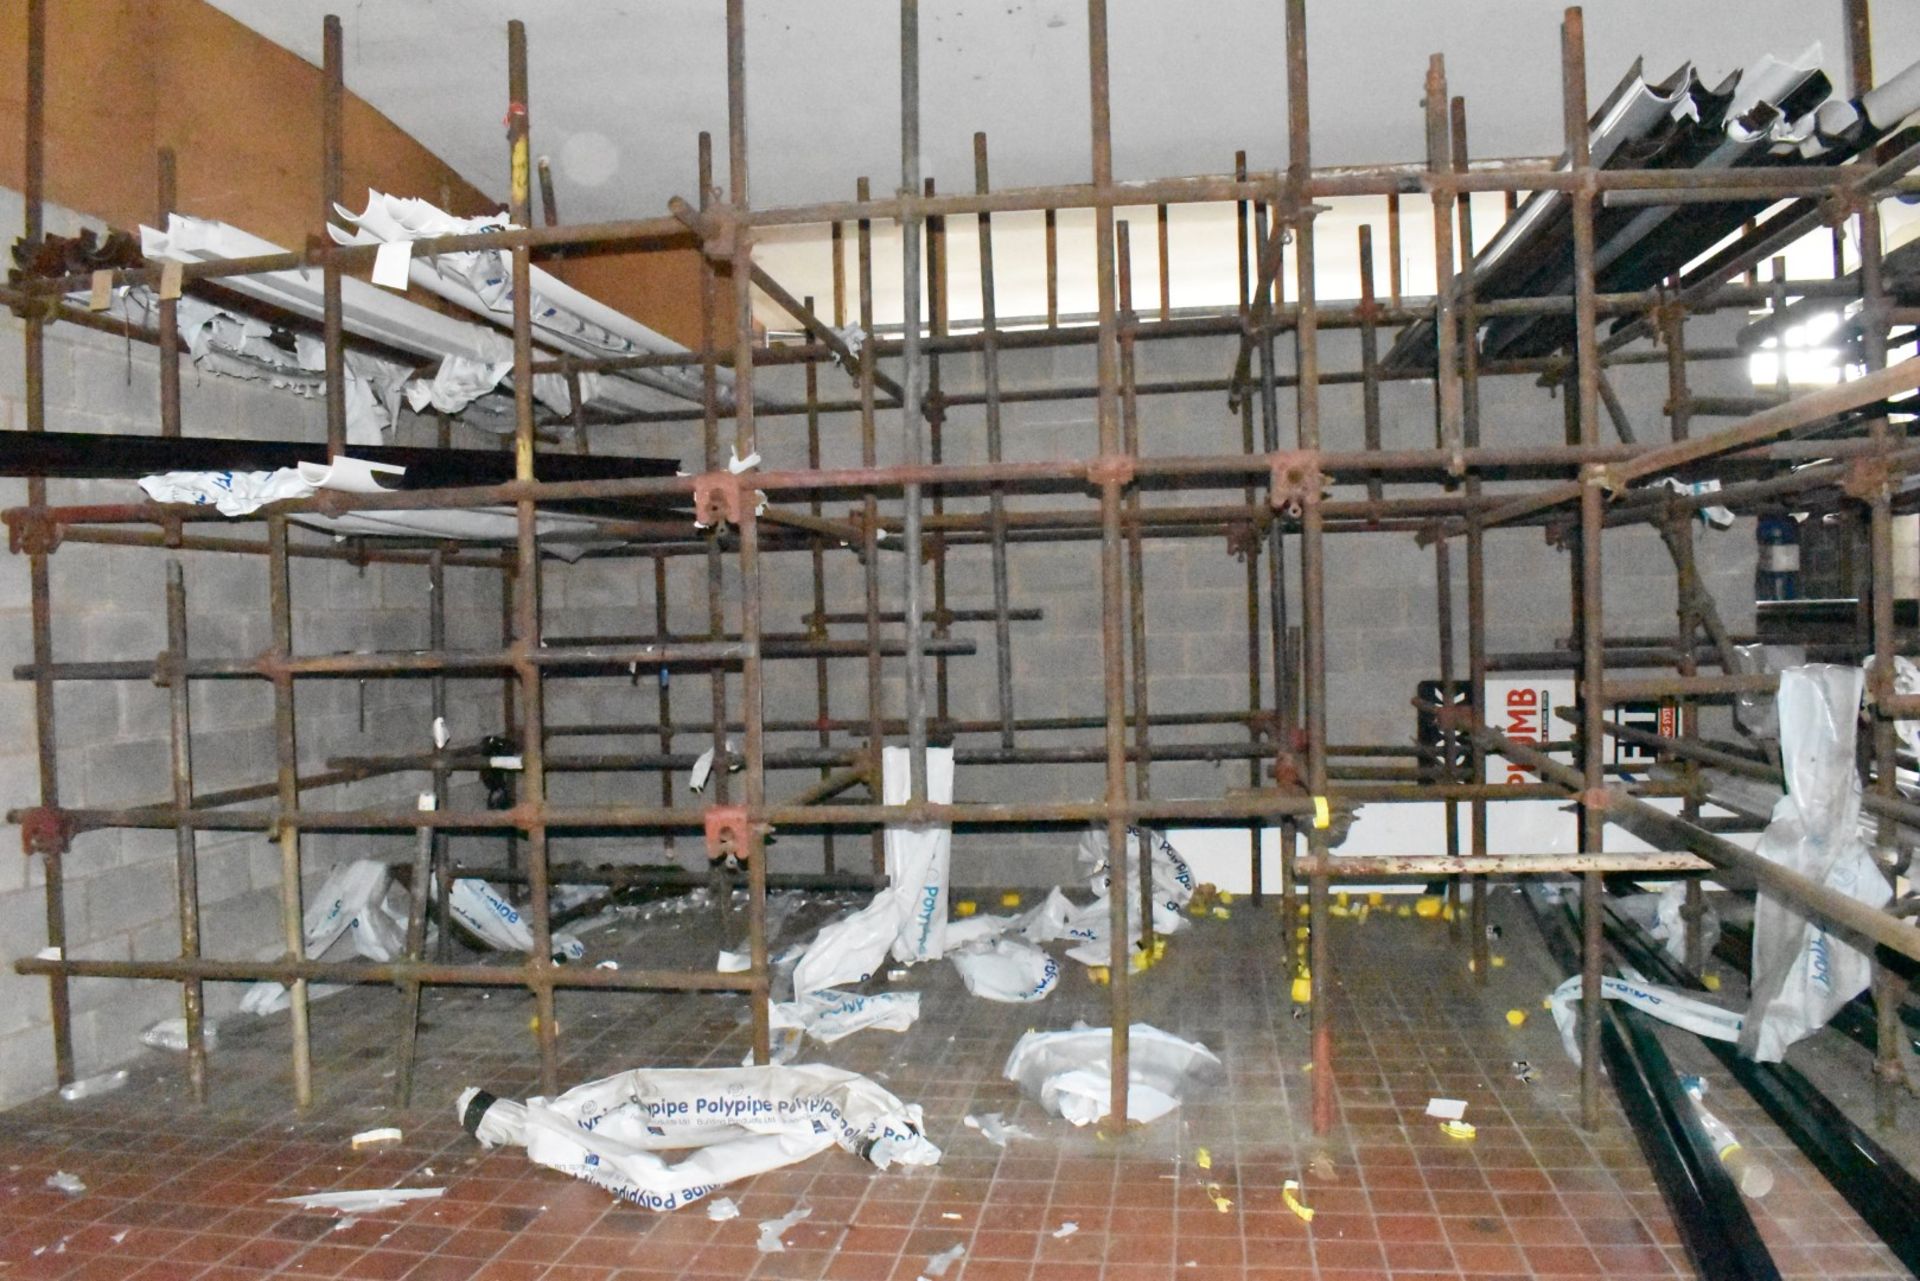 1 x Large Collection of Scaffolding and Fixtures Covering a Floor Space of Approx 13 x 13ft - Image 14 of 15